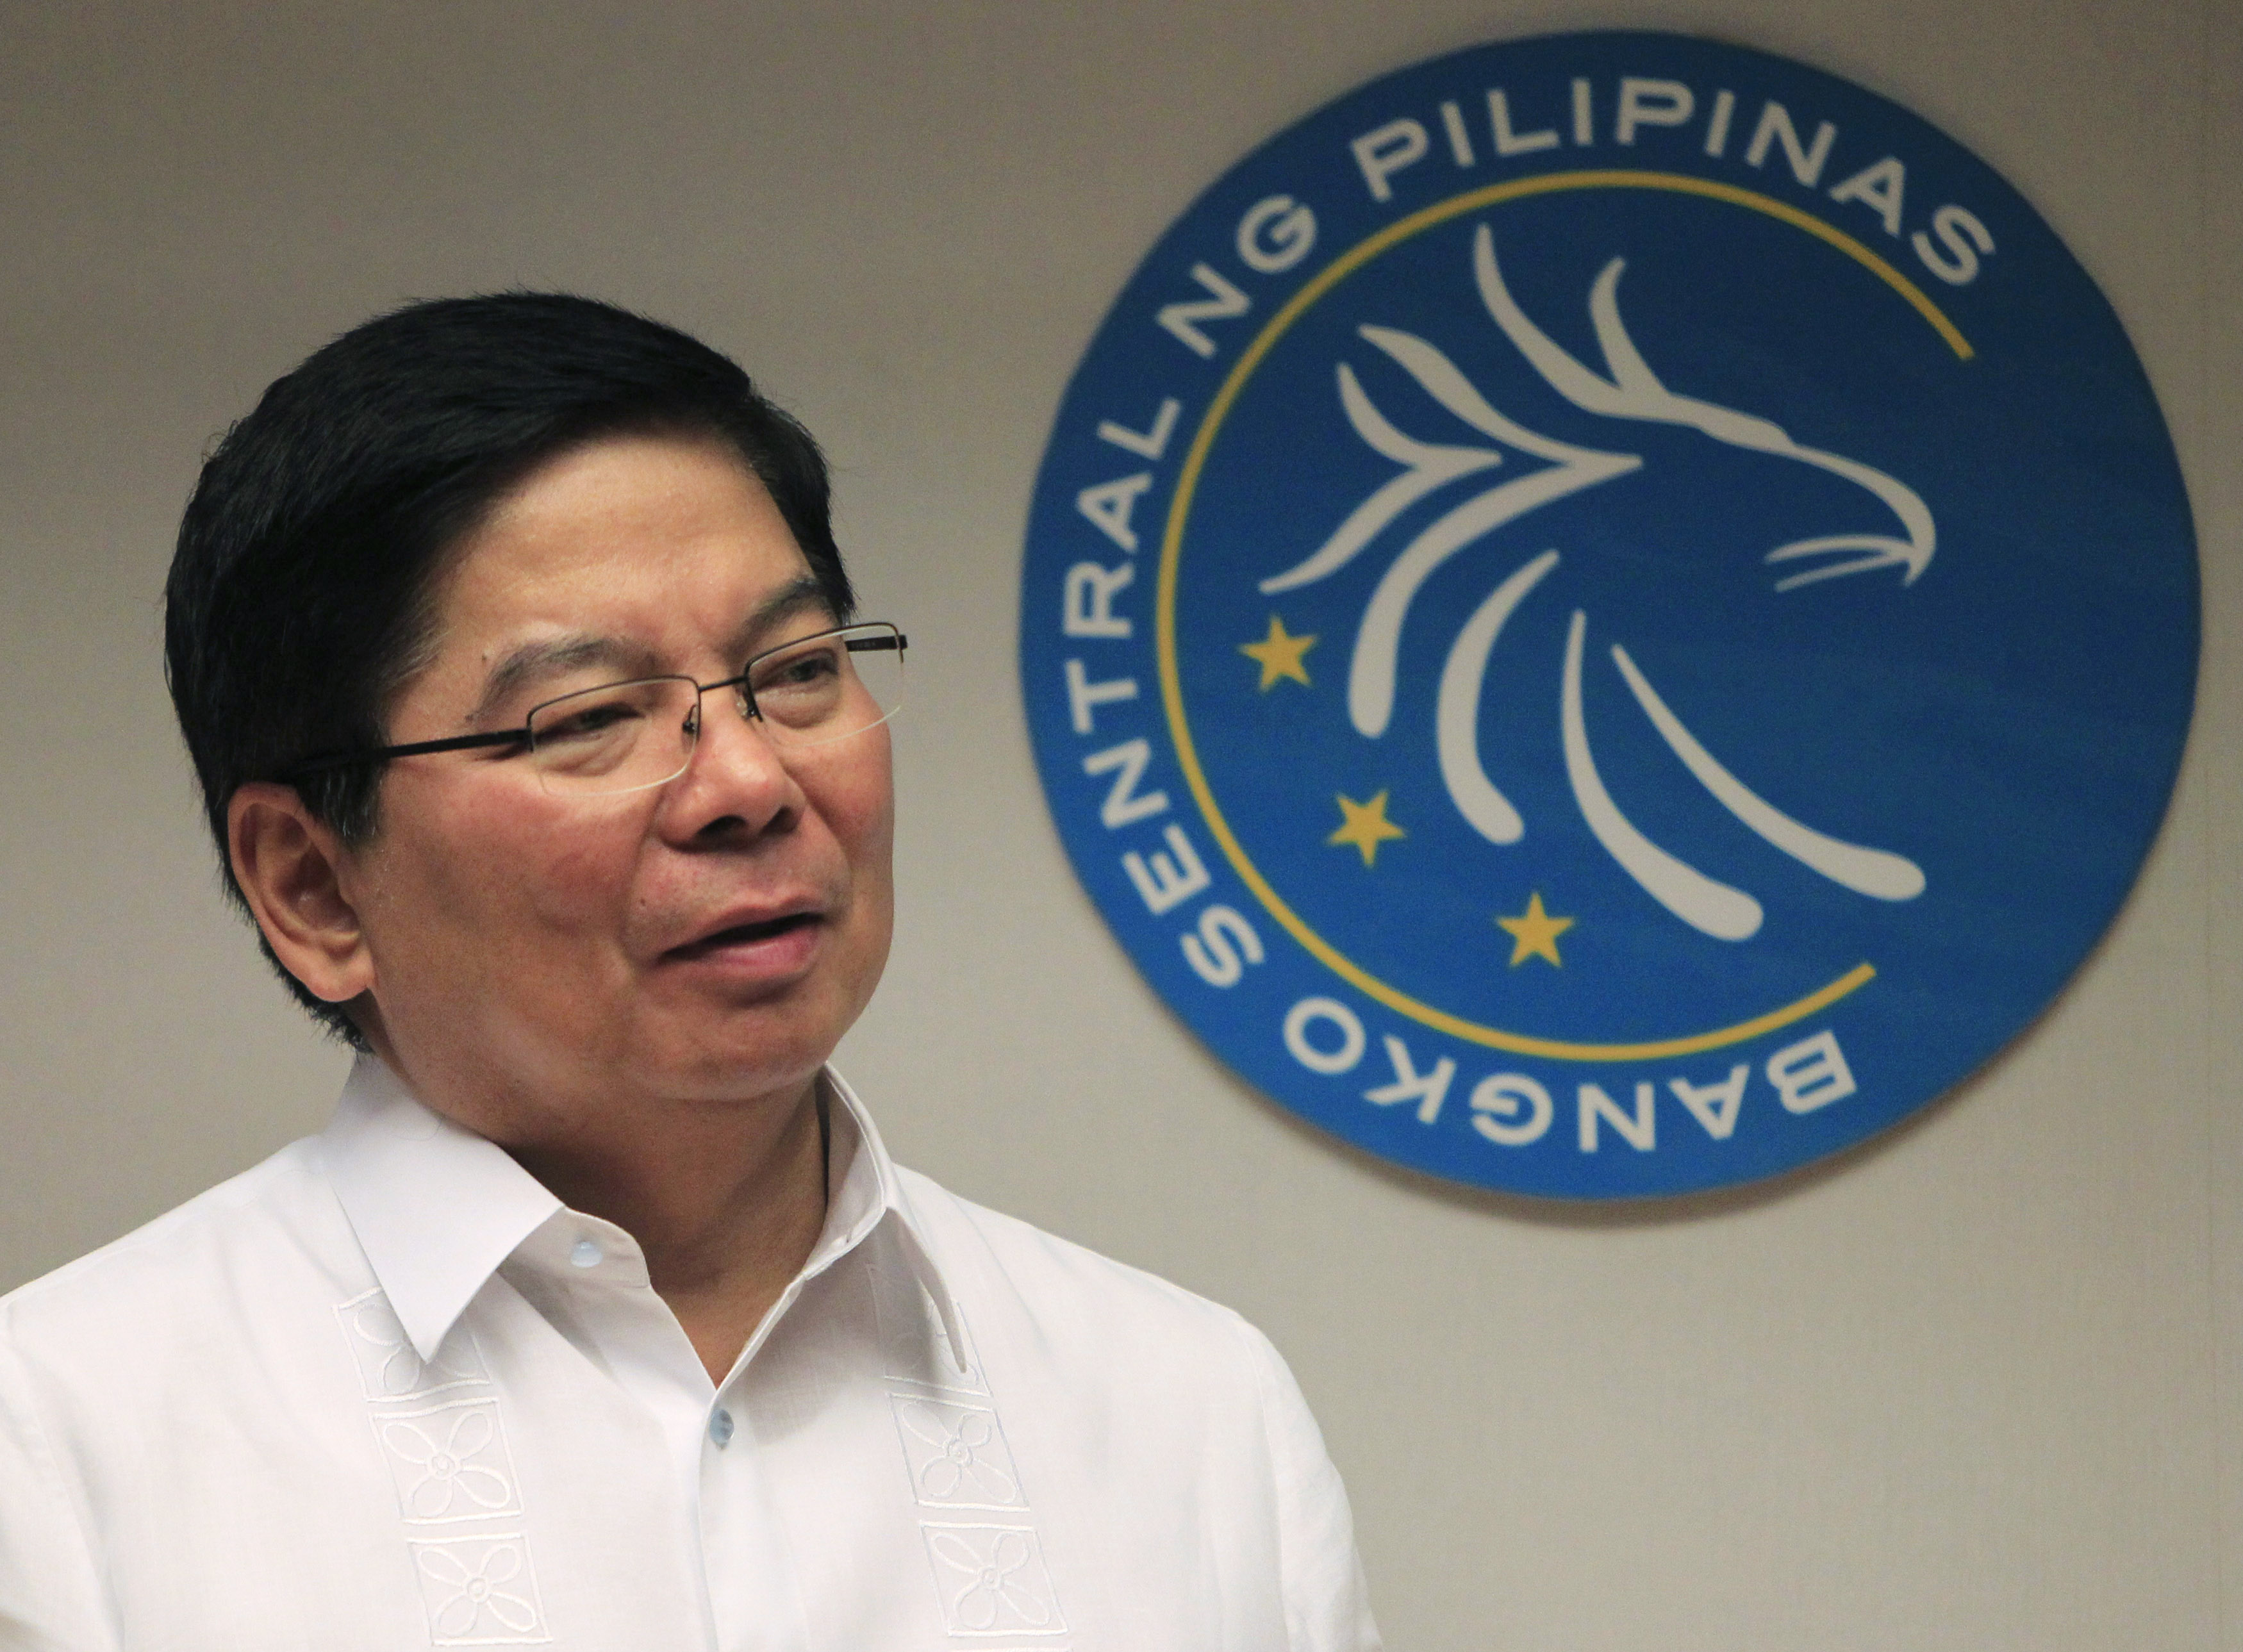 Amando Tetangco, governor of the Bangko Sentral ng Pilipinas (BSP), answers questions during an interview at the BSP headquarters in Manila January 17, 2014. The Philippine central bank is present in the foreign exchange market to curb excessive volatility, although the peso's weakness due to uncertainty over the pace at which the U.S. will cut stimulus is having no major inflation impact, Tetangco said on Friday. REUTERS/Romeo Ranoco (PHILIPPINES - Tags: BUSINESS POLITICS) - RTX17HWJ